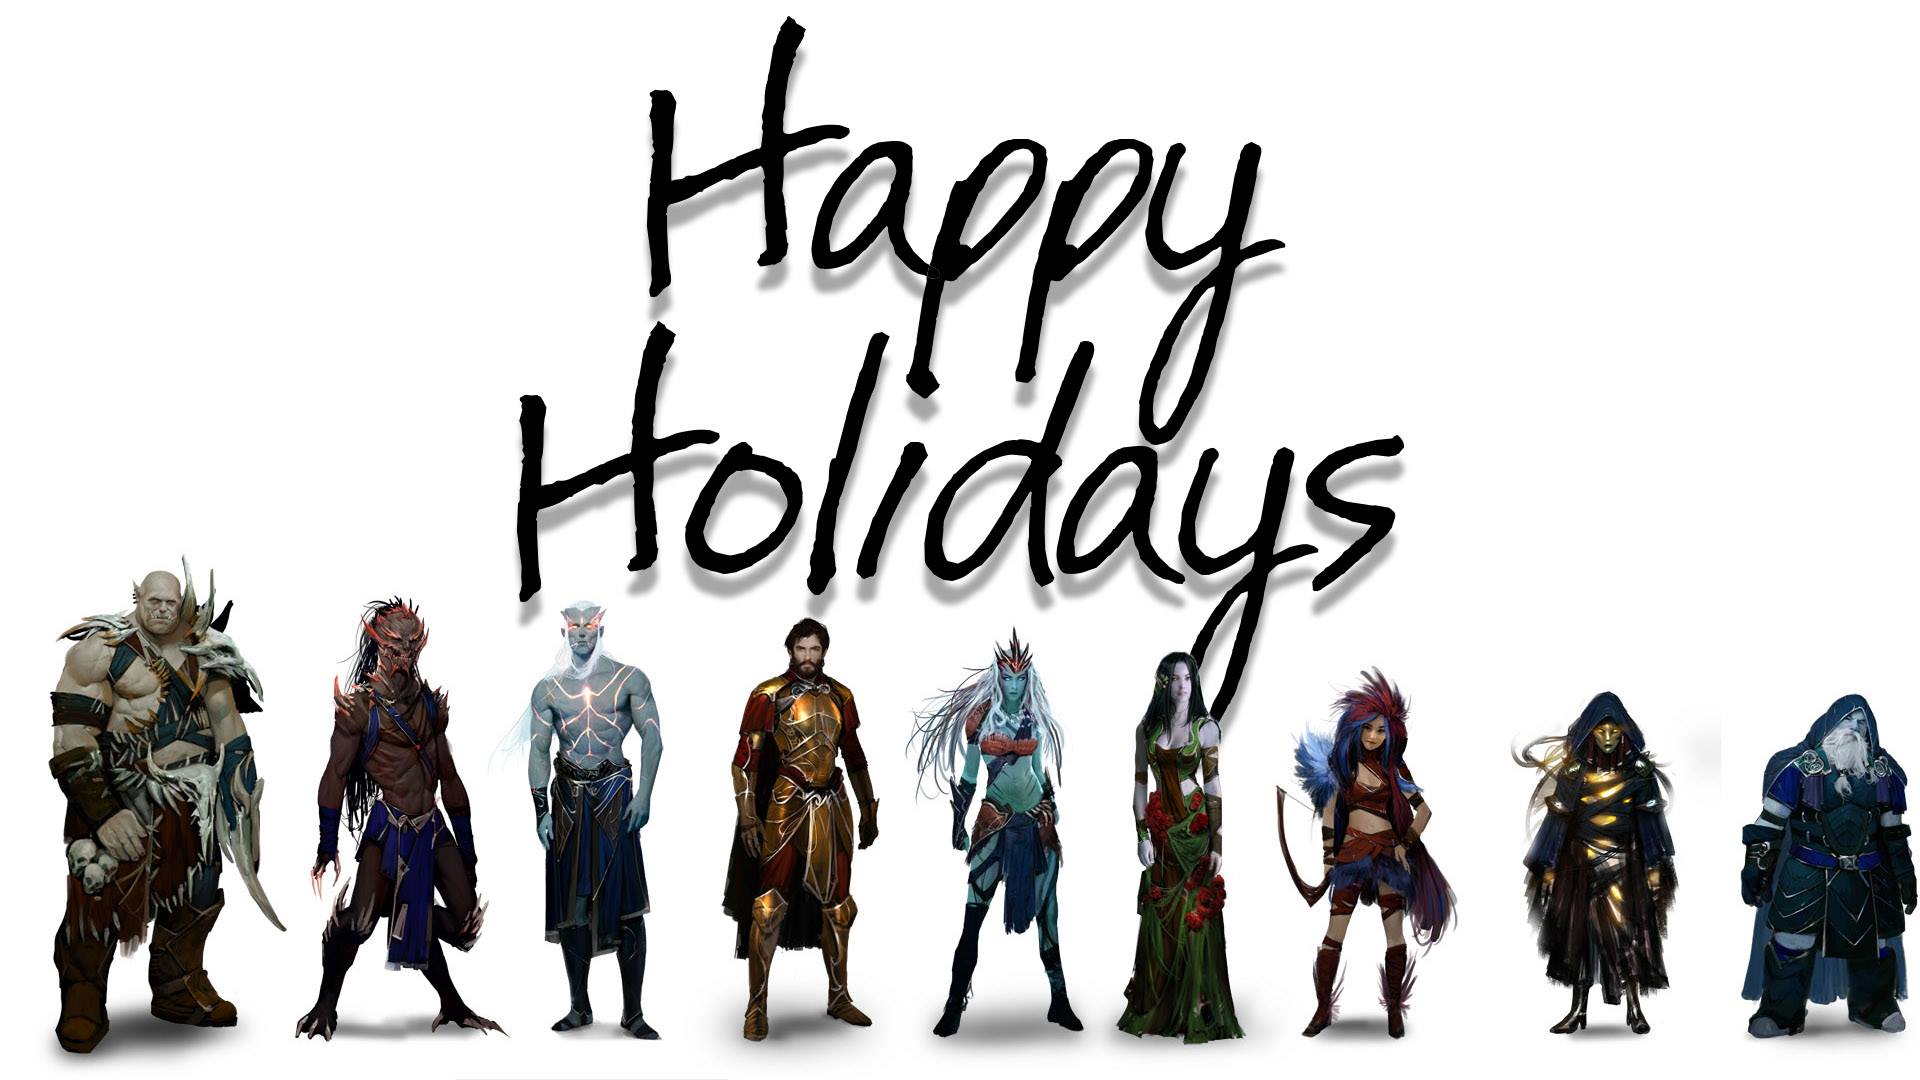 2016-Dec 8: Happy Holidays promo with (from left to right) Ogre, Skar, Archai, Human, Dark Myr, Elf, Halfling, Gnome, and Dwarf concept art